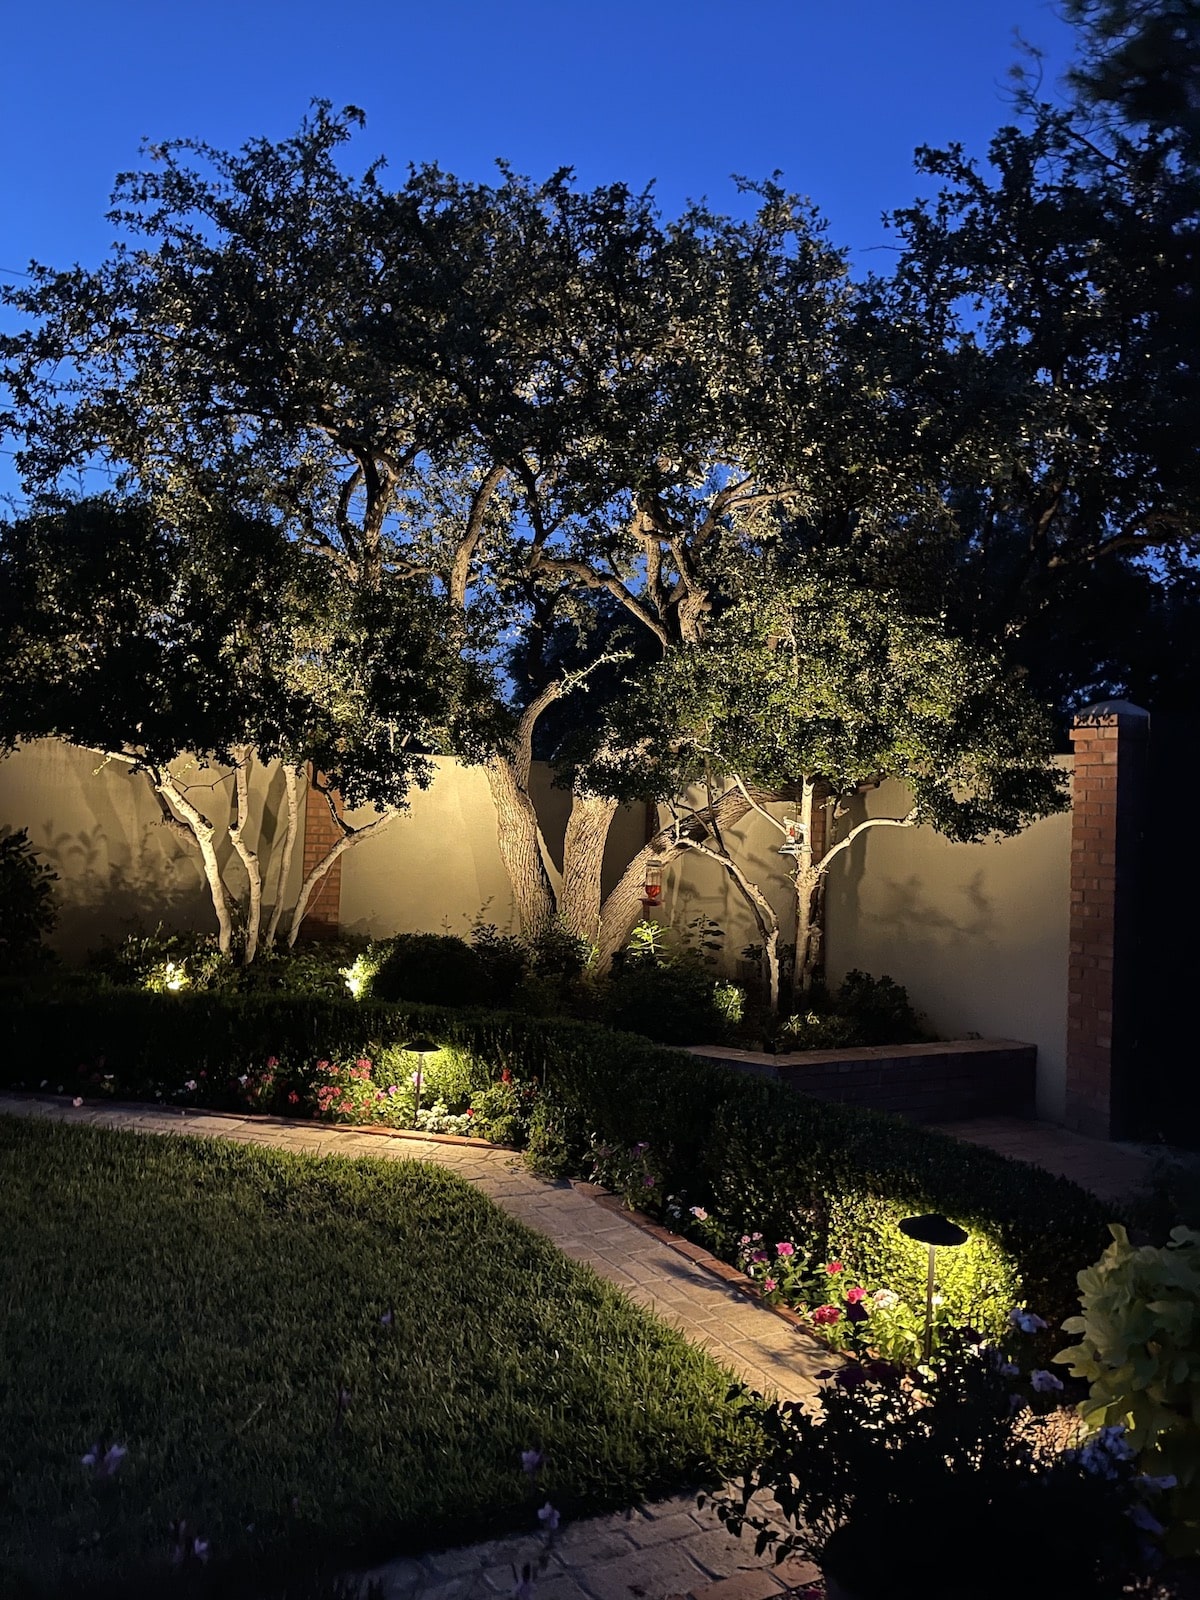 landscape lighting for a walkway of a home. the trees and fence are lit up